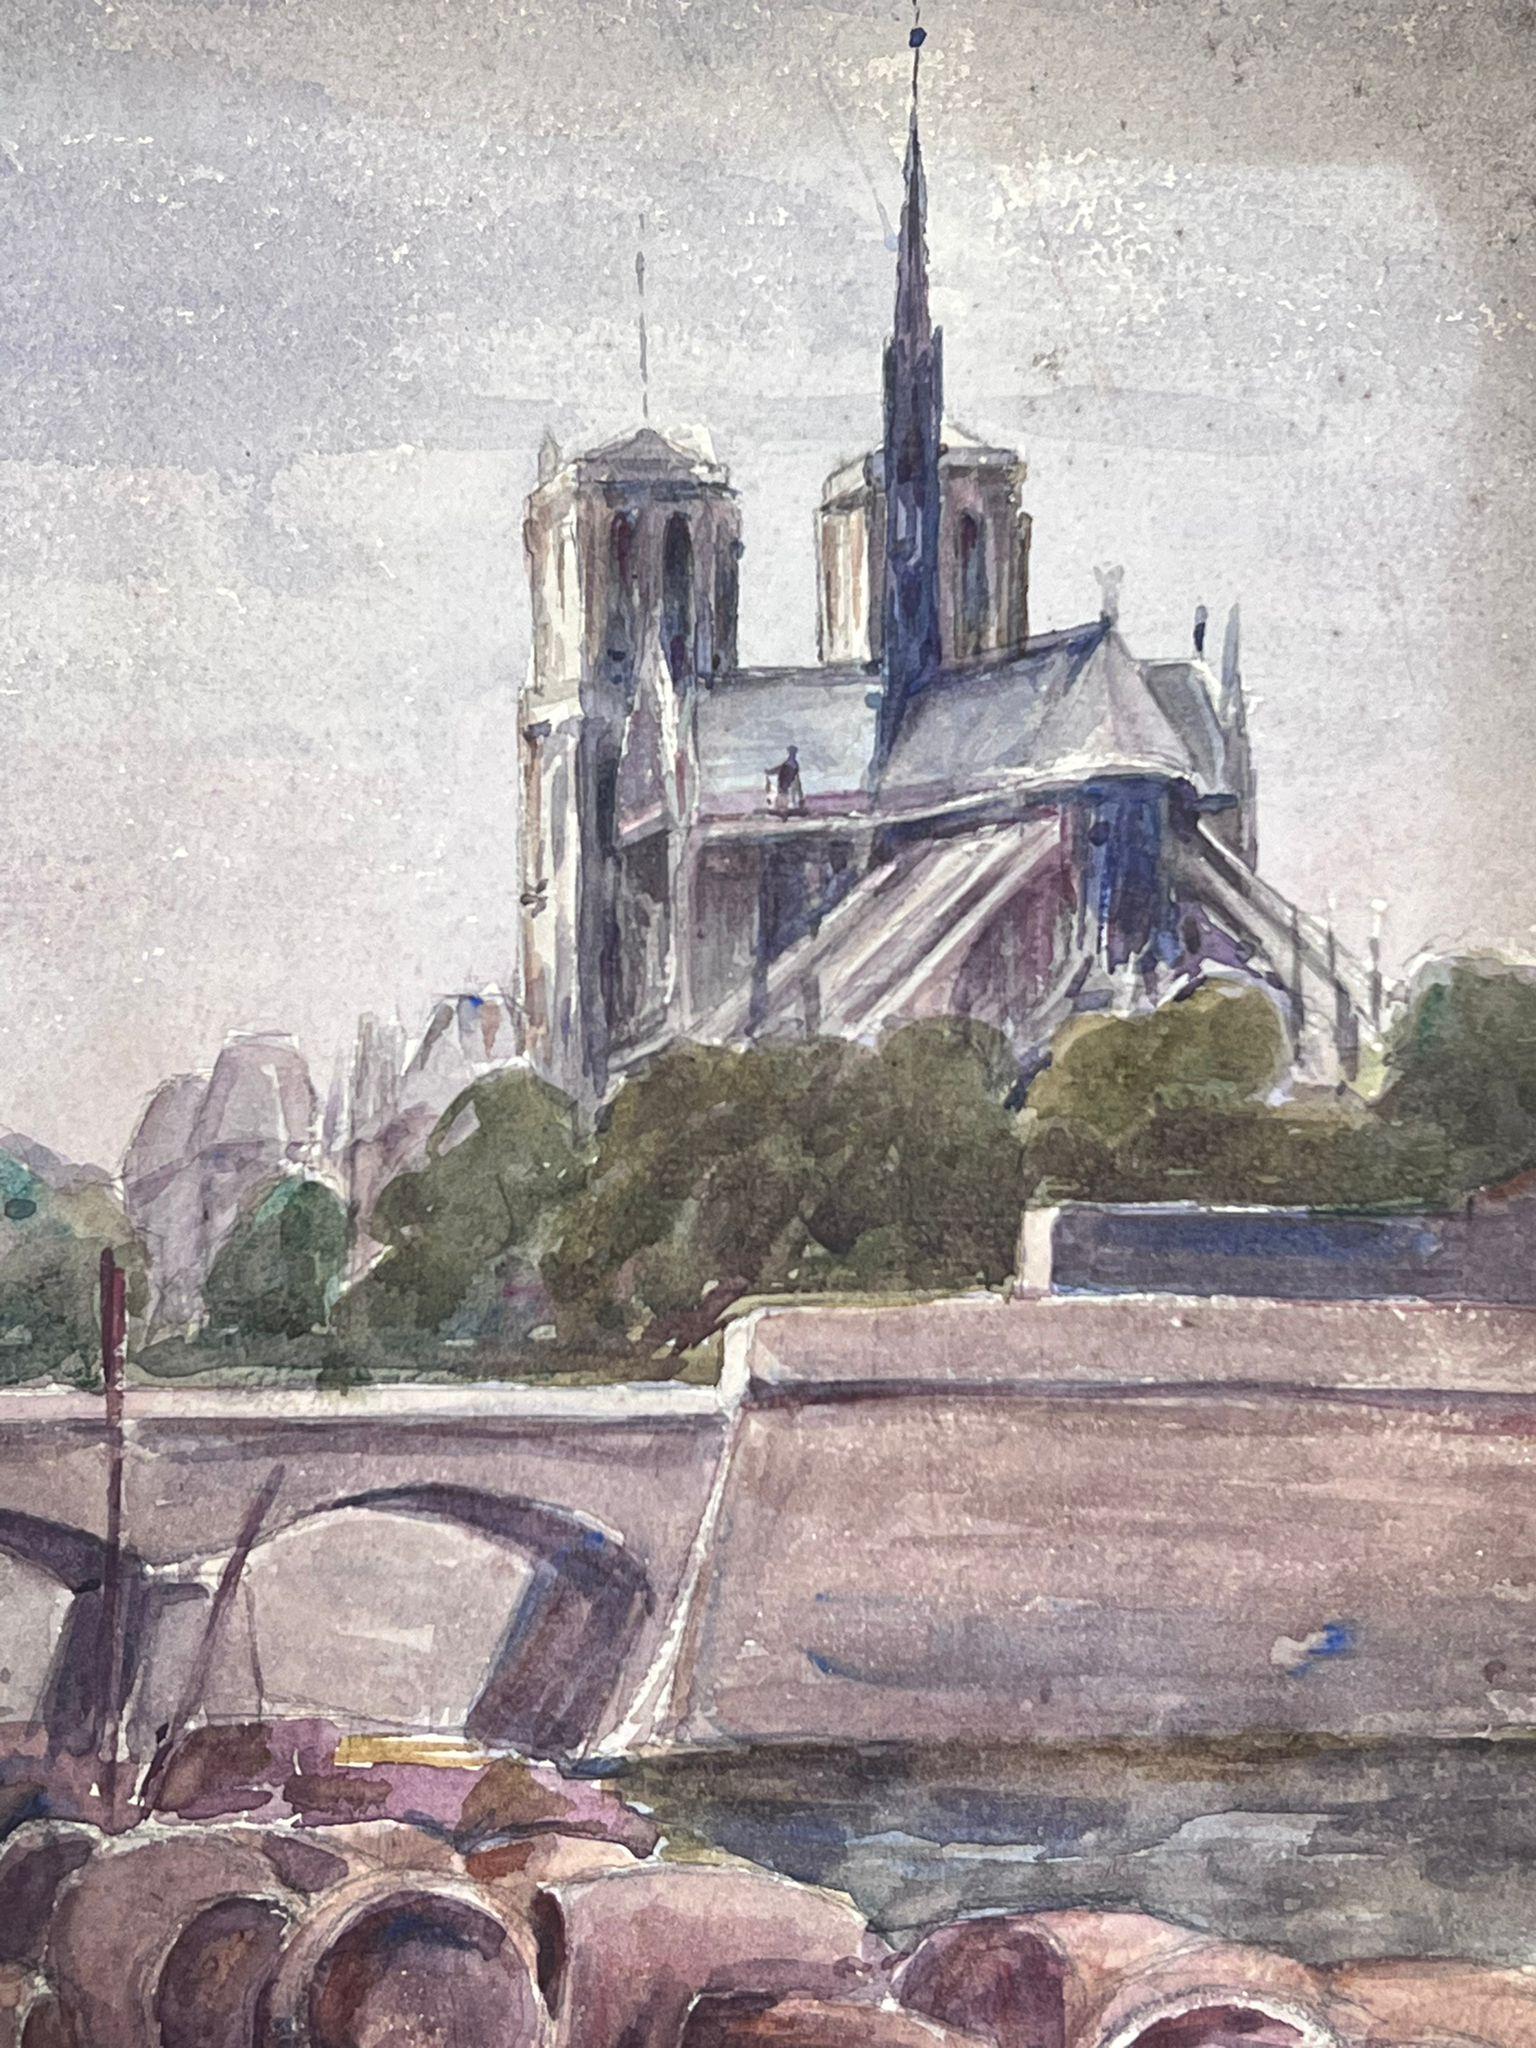 Notre Damme Barrels Along The River Seine Bank 1930's French Landscape - Impressionist Painting by Louise Alix